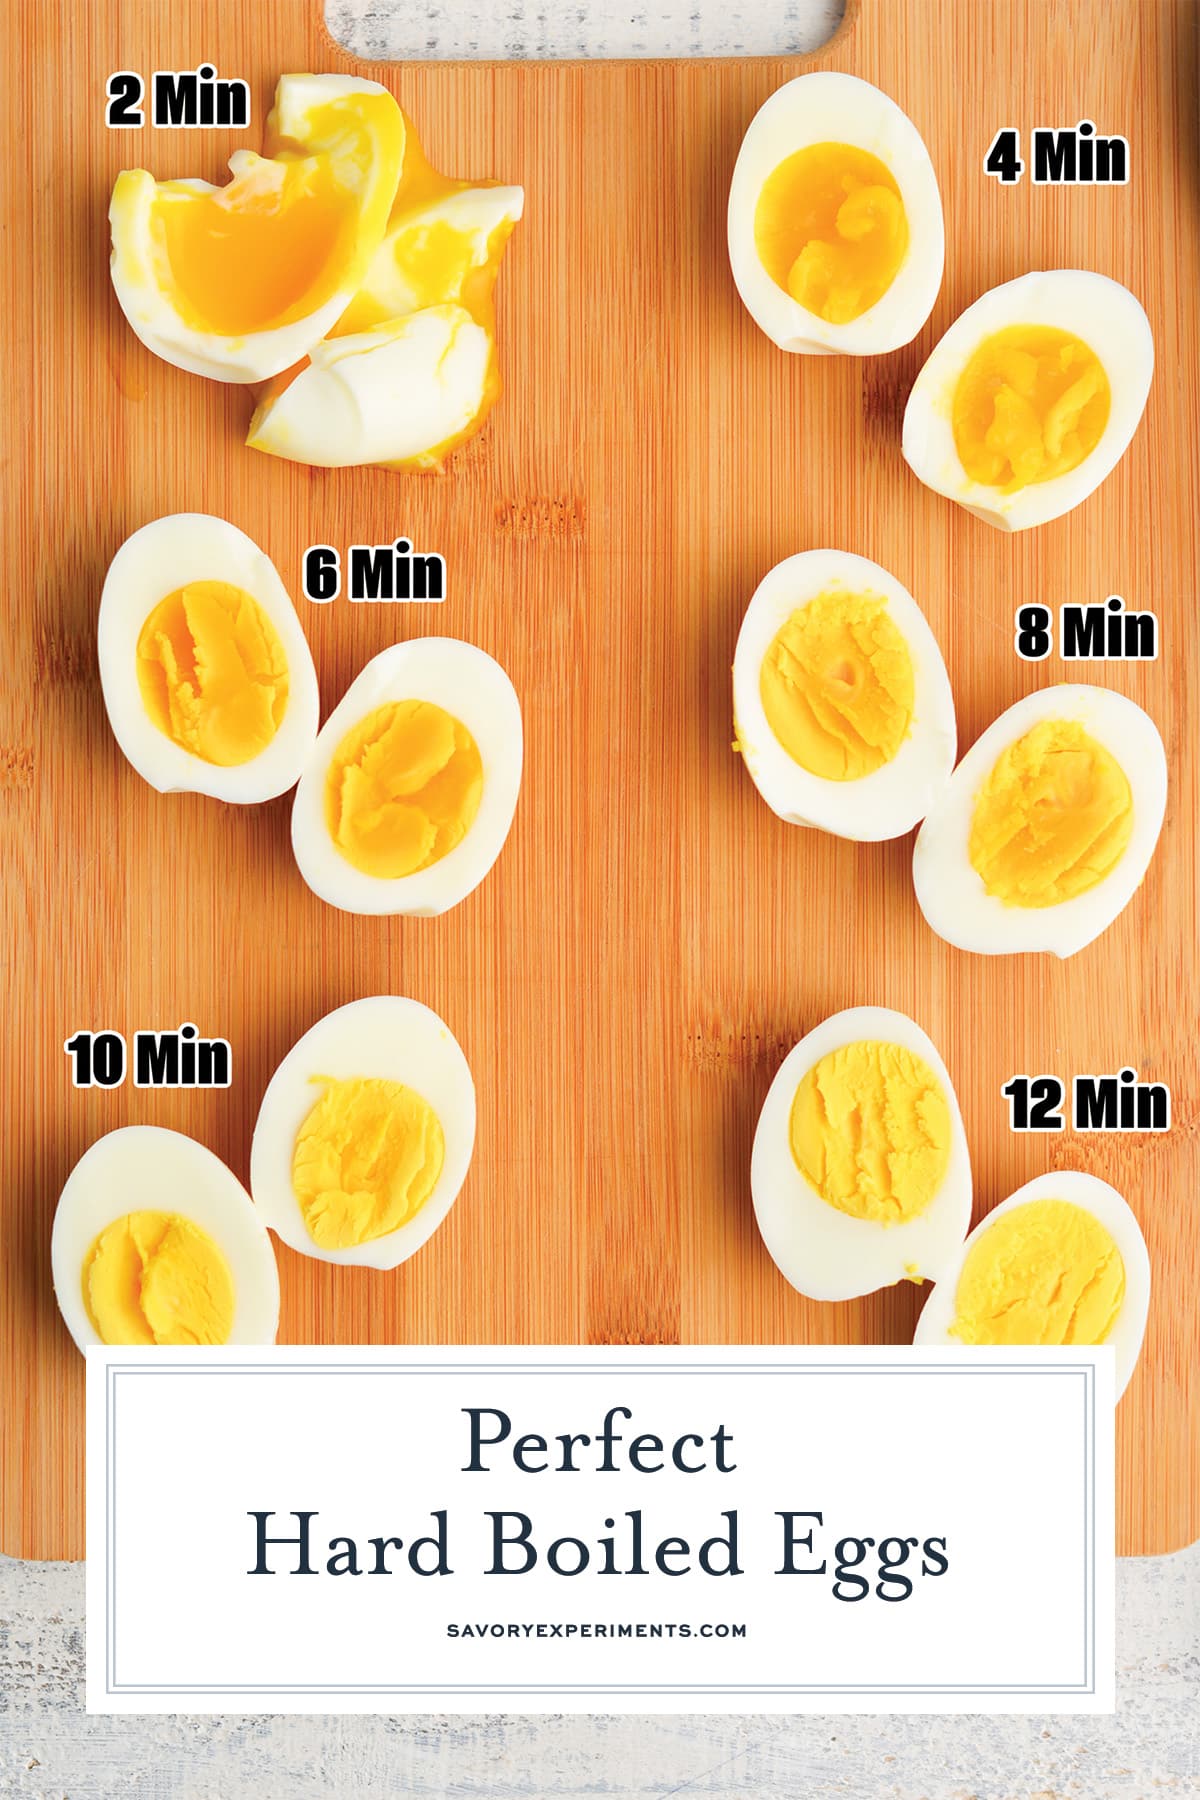 https://www.savoryexperiments.com/wp-content/uploads/2023/03/Perfect-Hard-Boiled-Eggs-Infographic.jpg